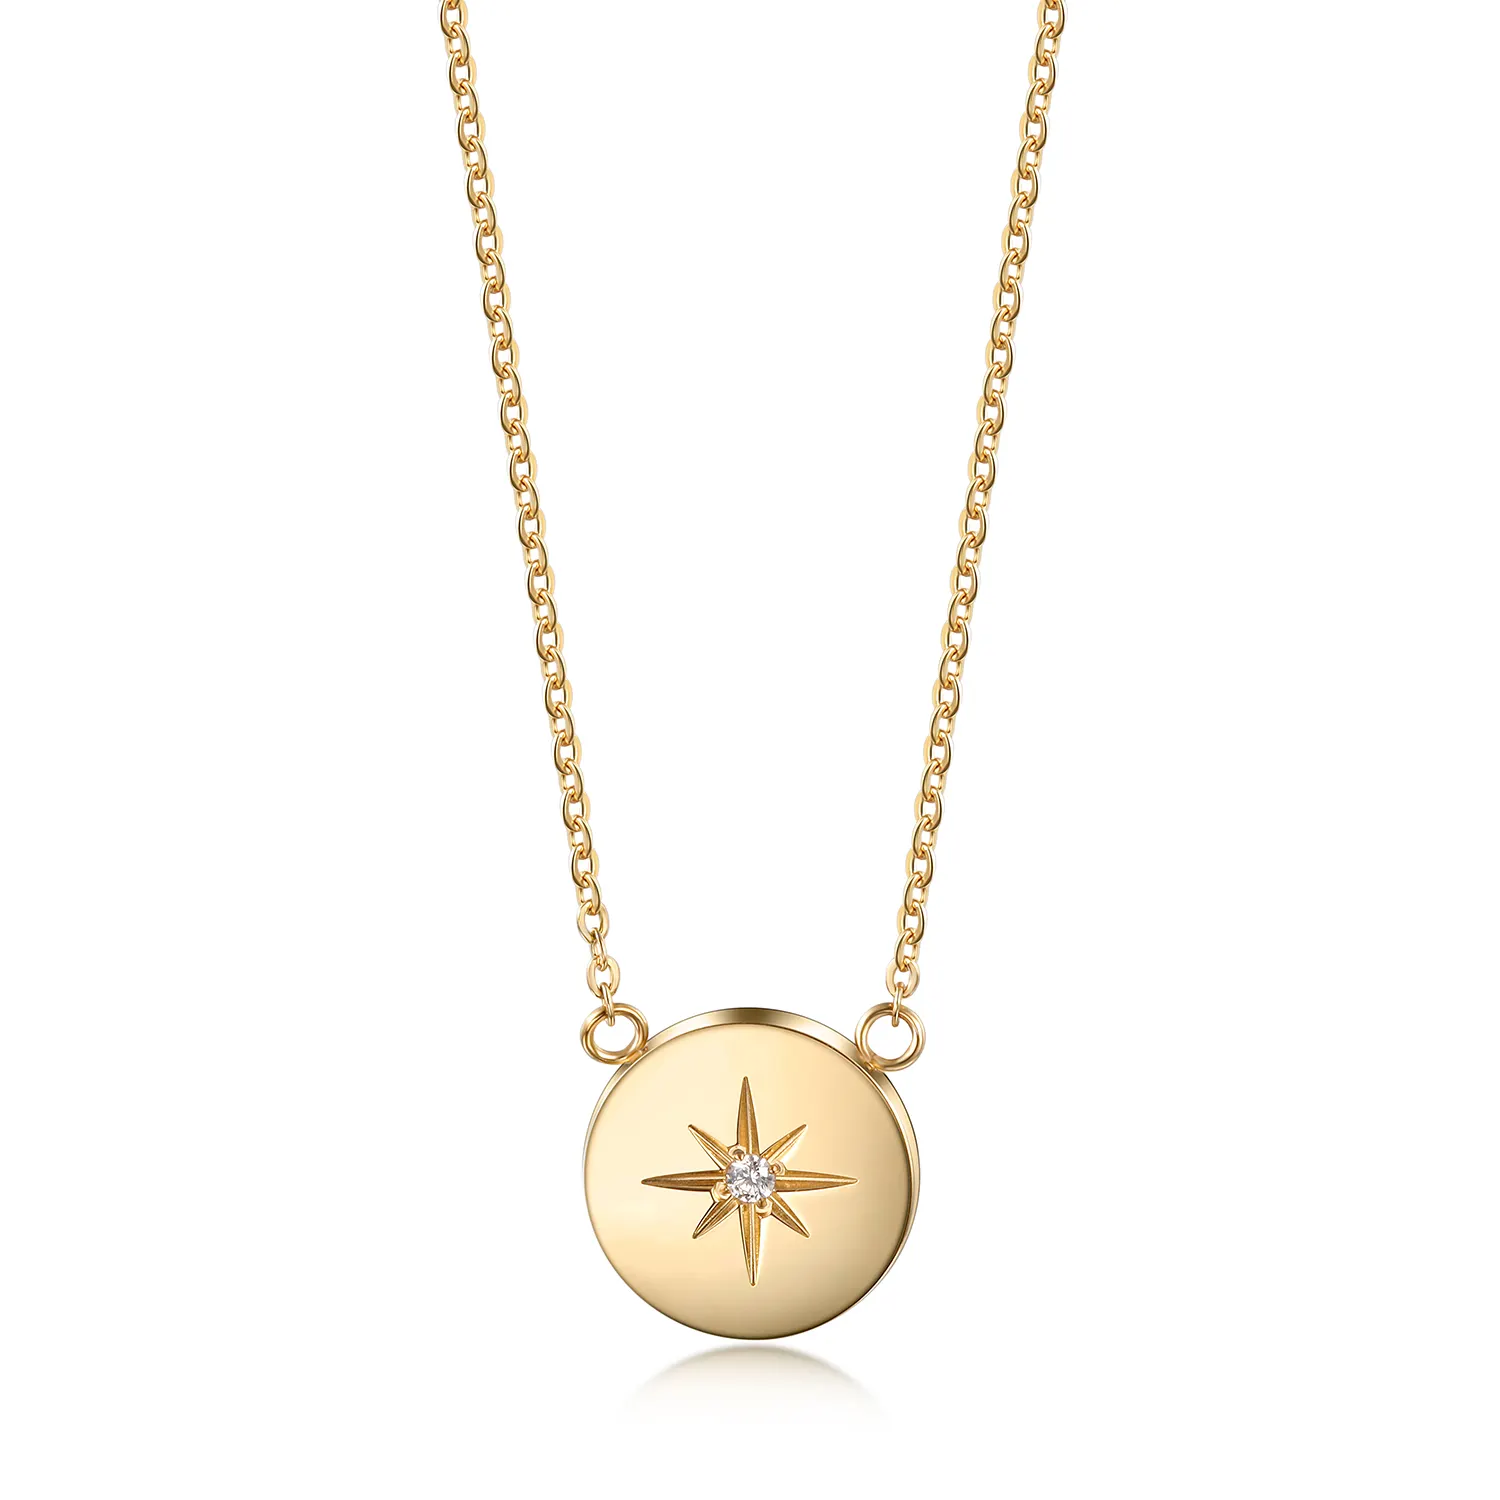 Stainless Steel Round Charm North Star sun and moon Necklace